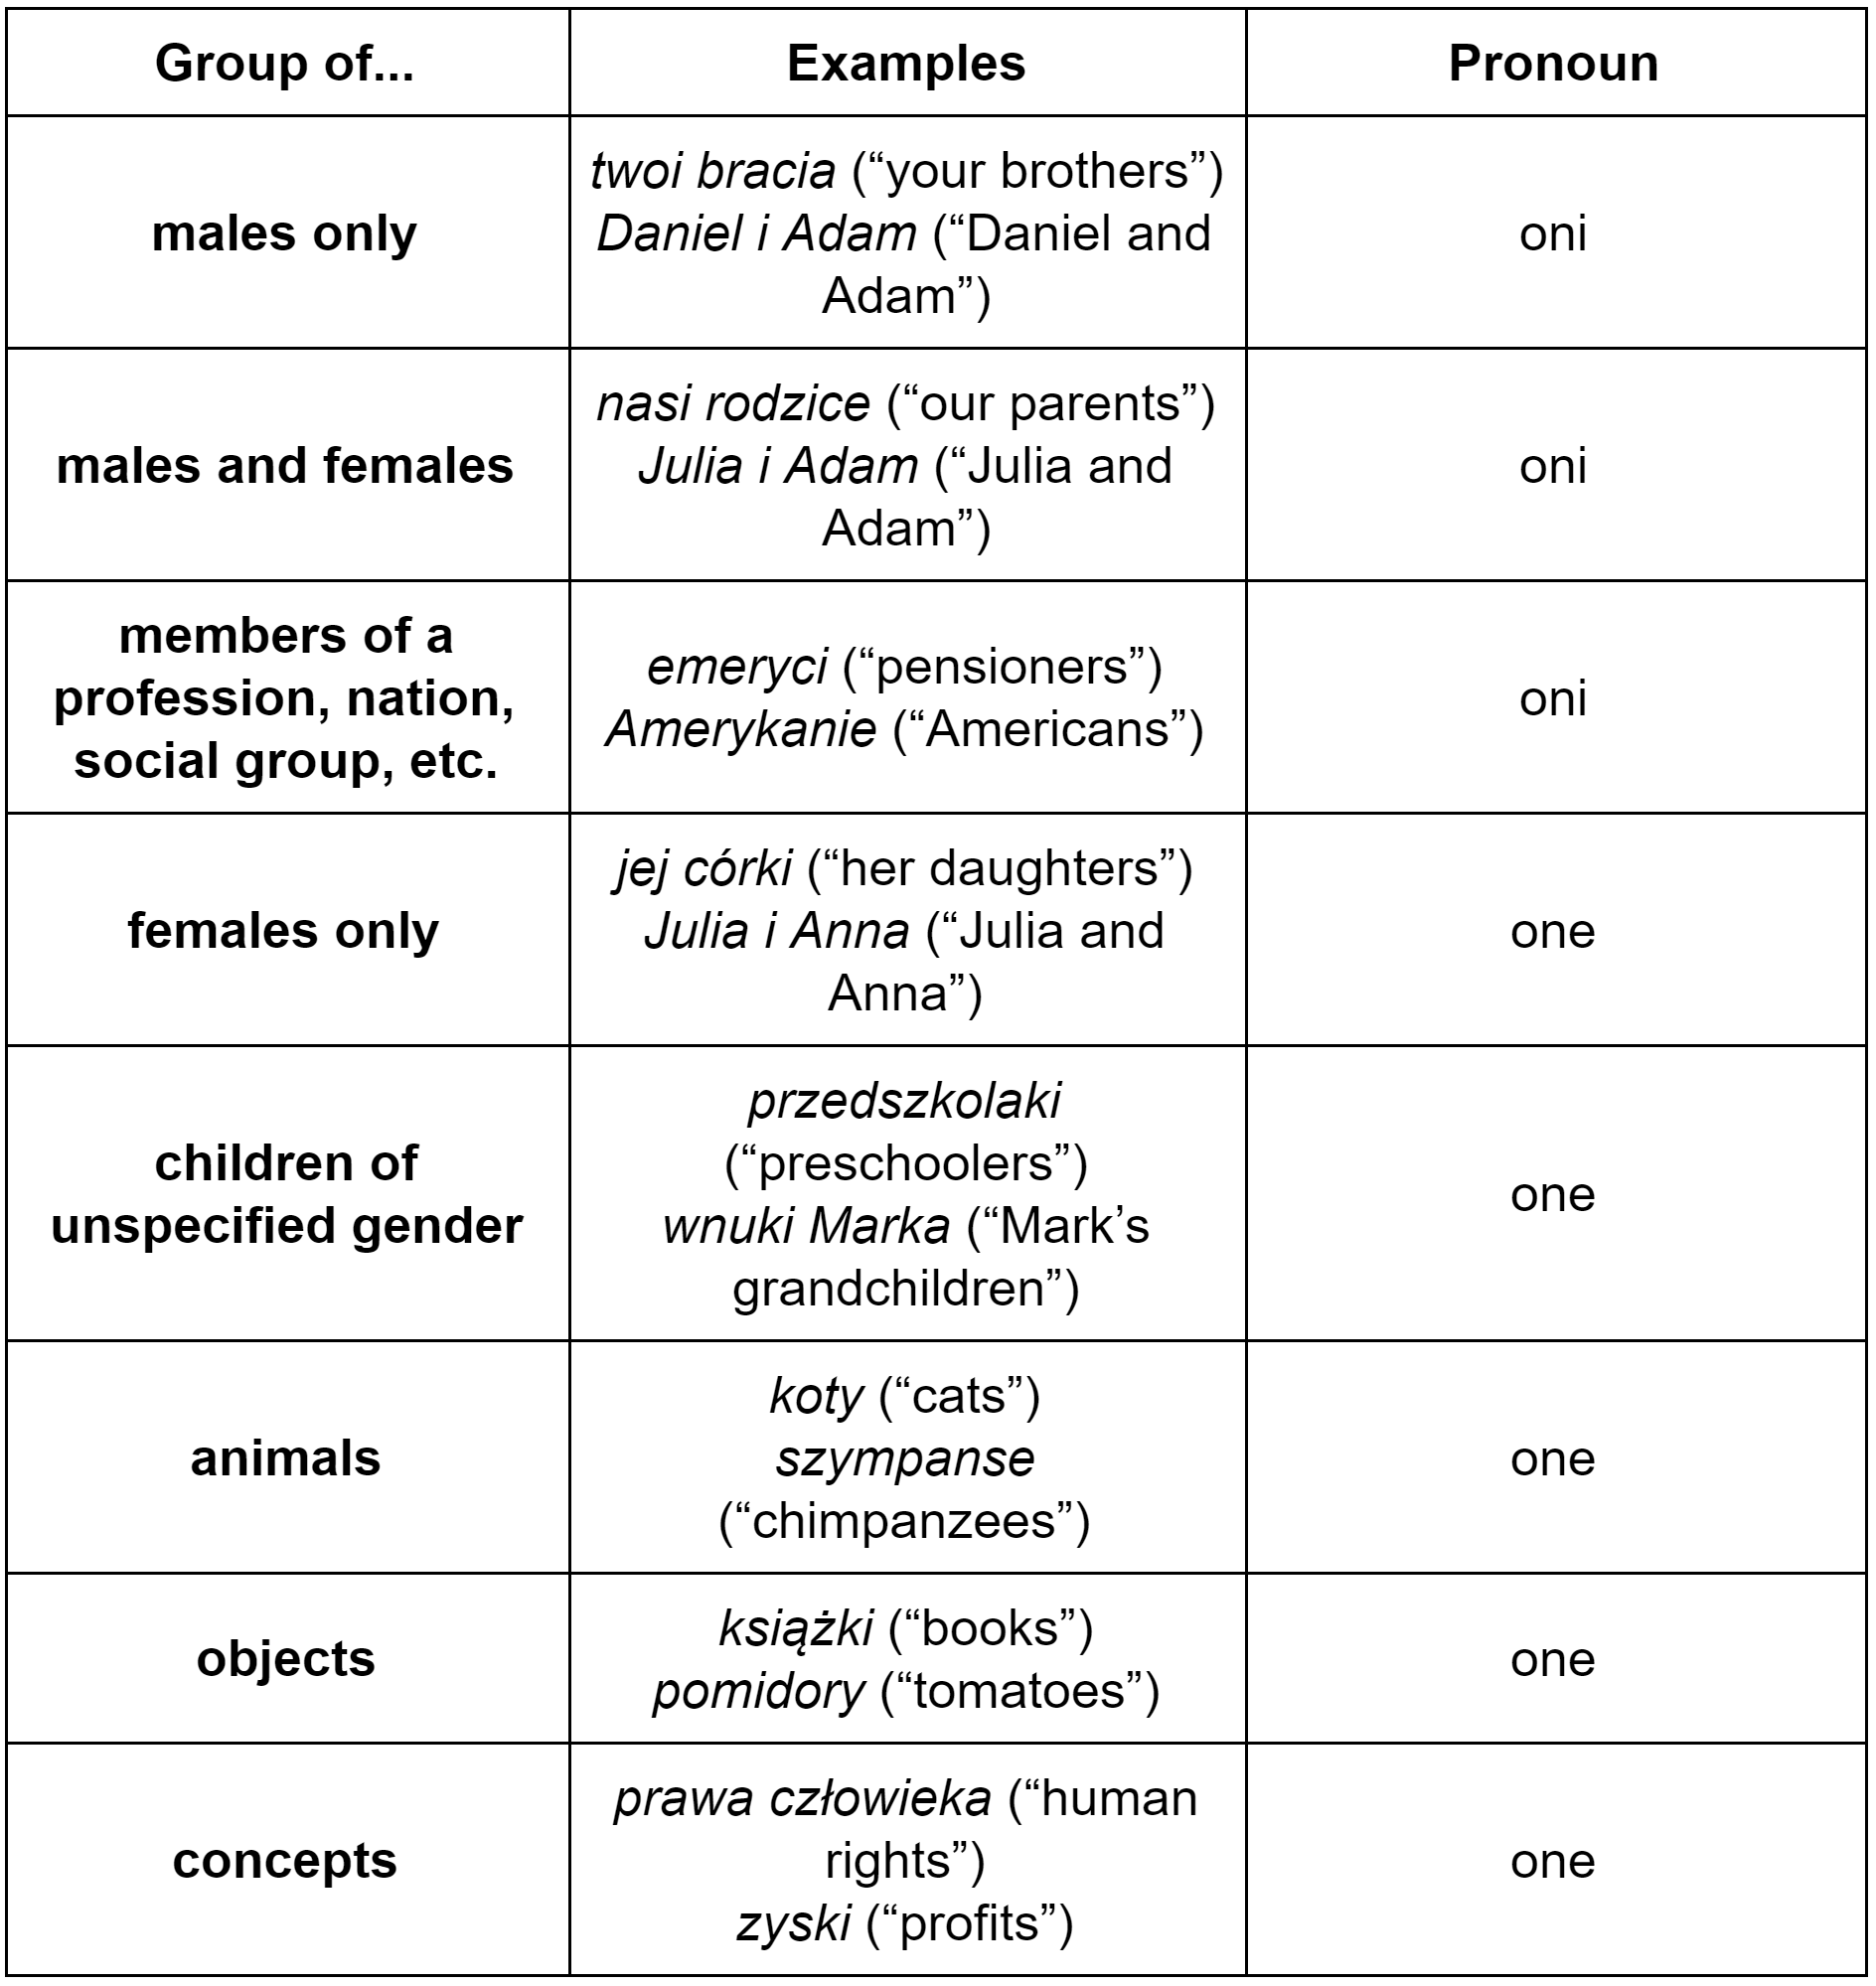 Polish plural personal pronouns and gender table (masculine personal “oni” and non-masculine “one”)